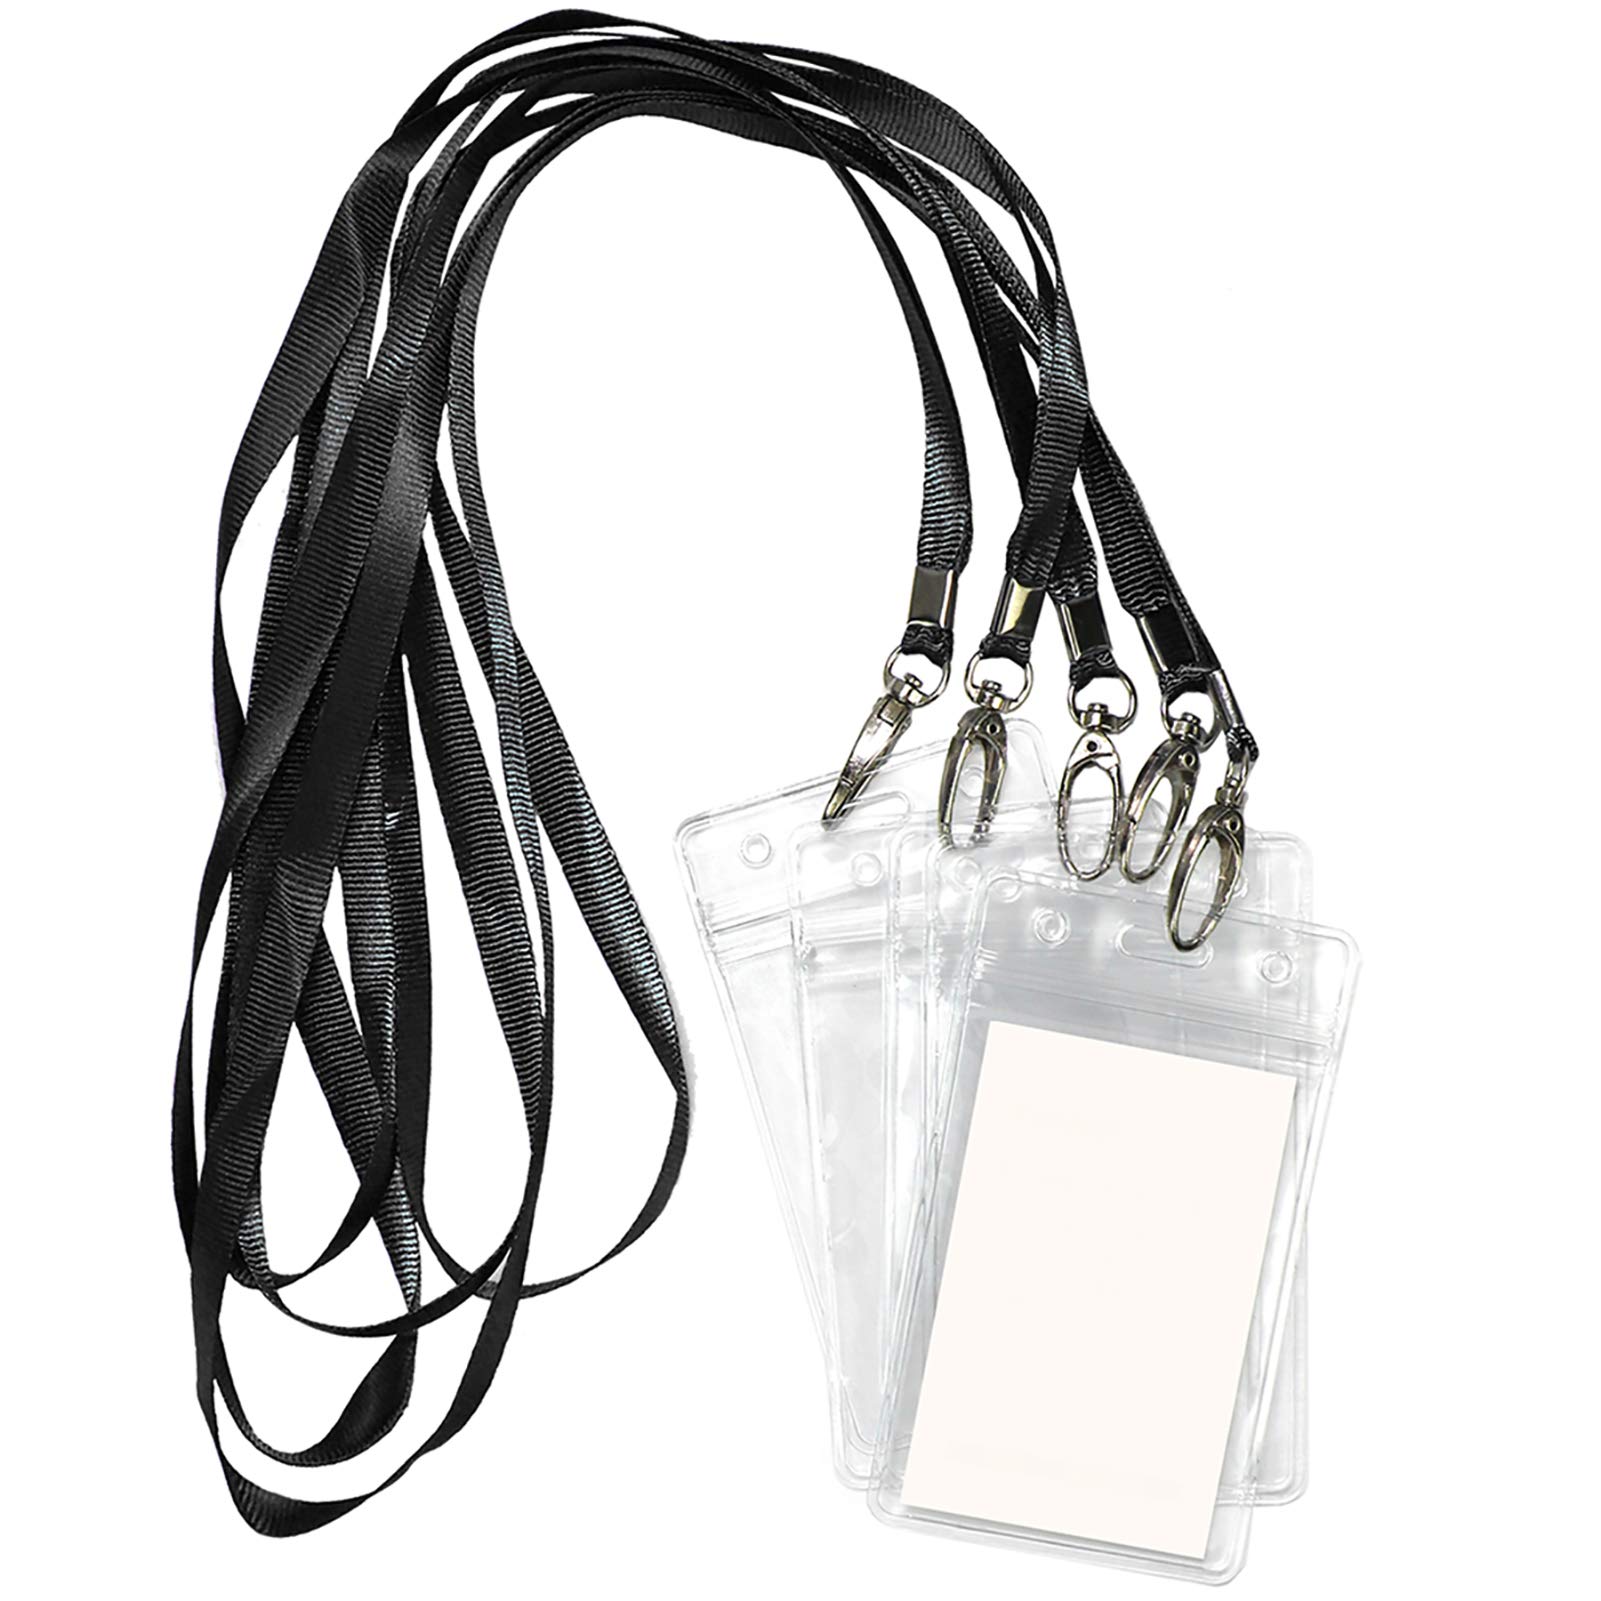 Lanyard with ID Holder 50 Pcs Waterproof Name Tag Vertical Badge ID Card Holders ID Pass Holder and 50 Pcs Flat Neck Black Lanyards Swivel Hook